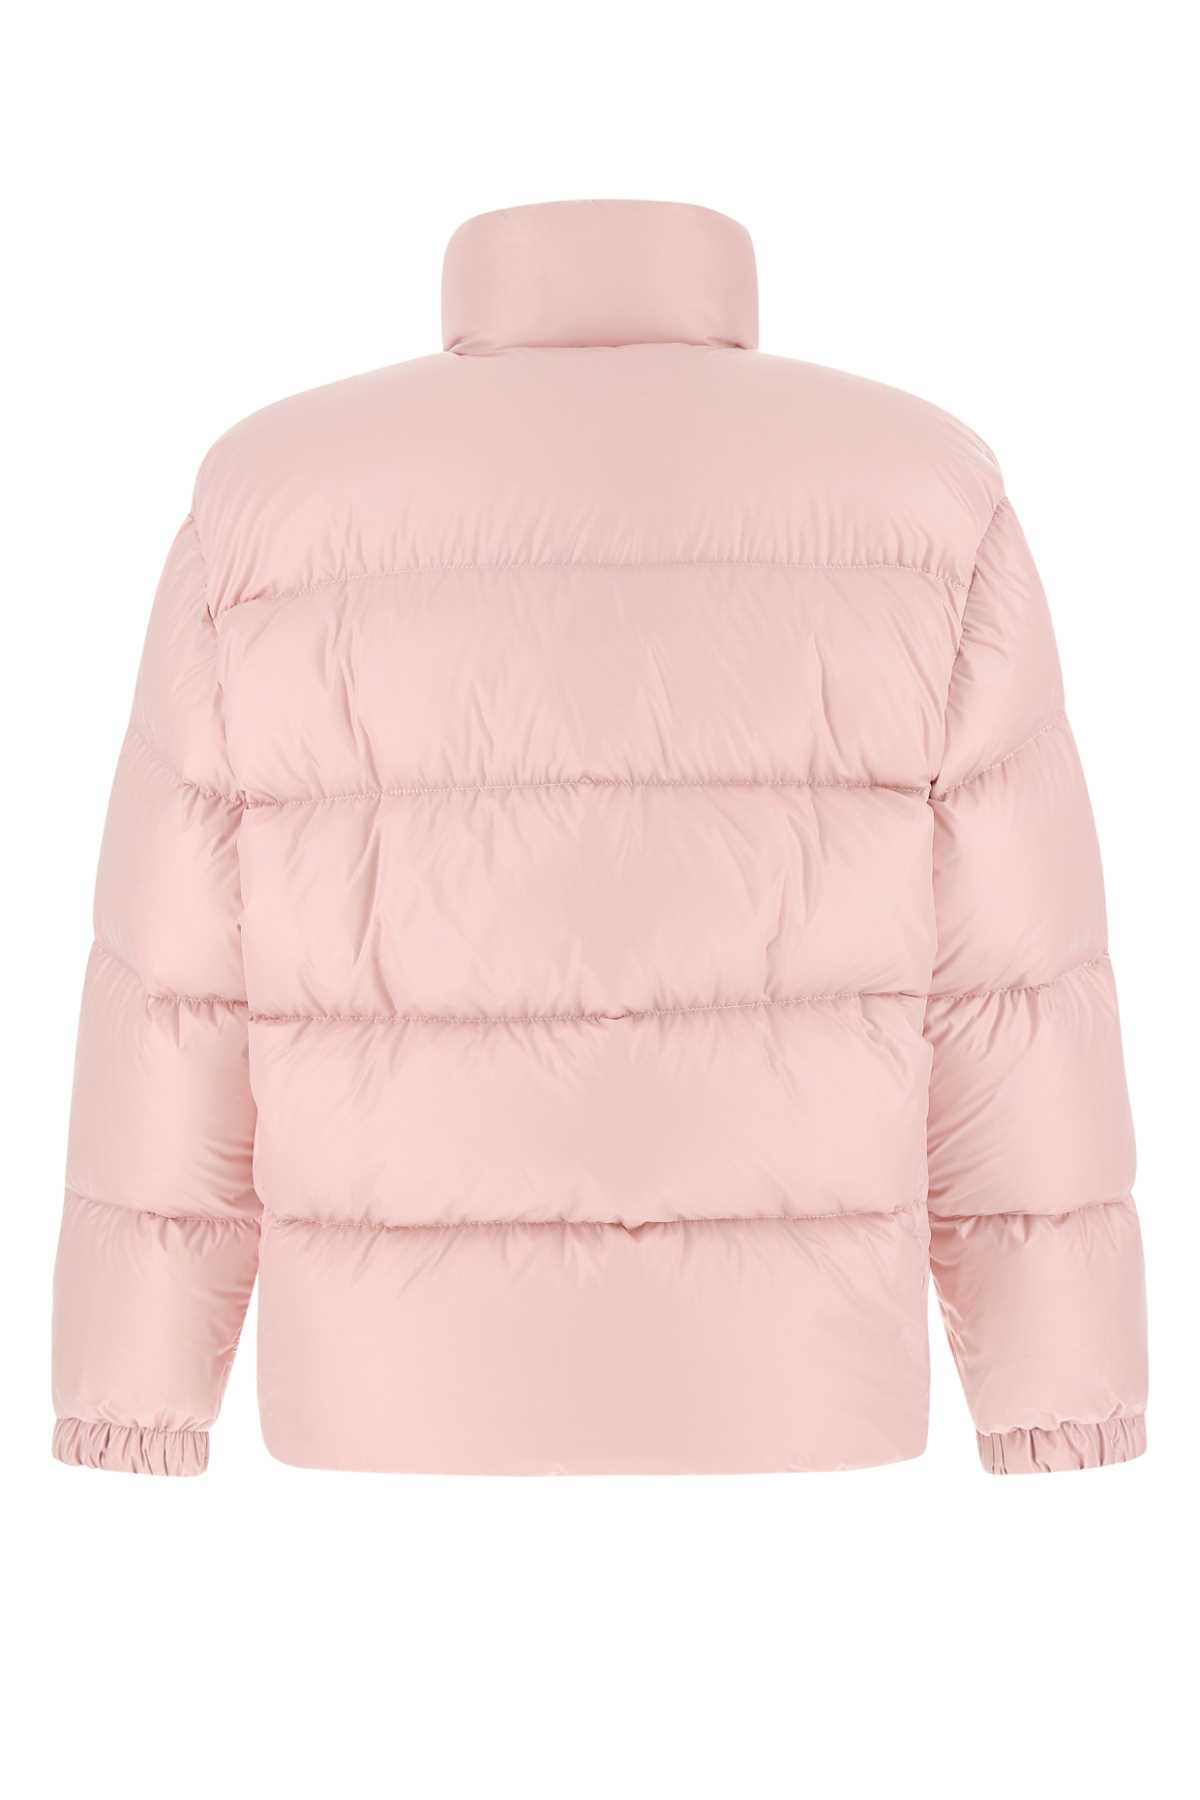 Prada Pink Recycled Polyester Down Jacket In F0e18